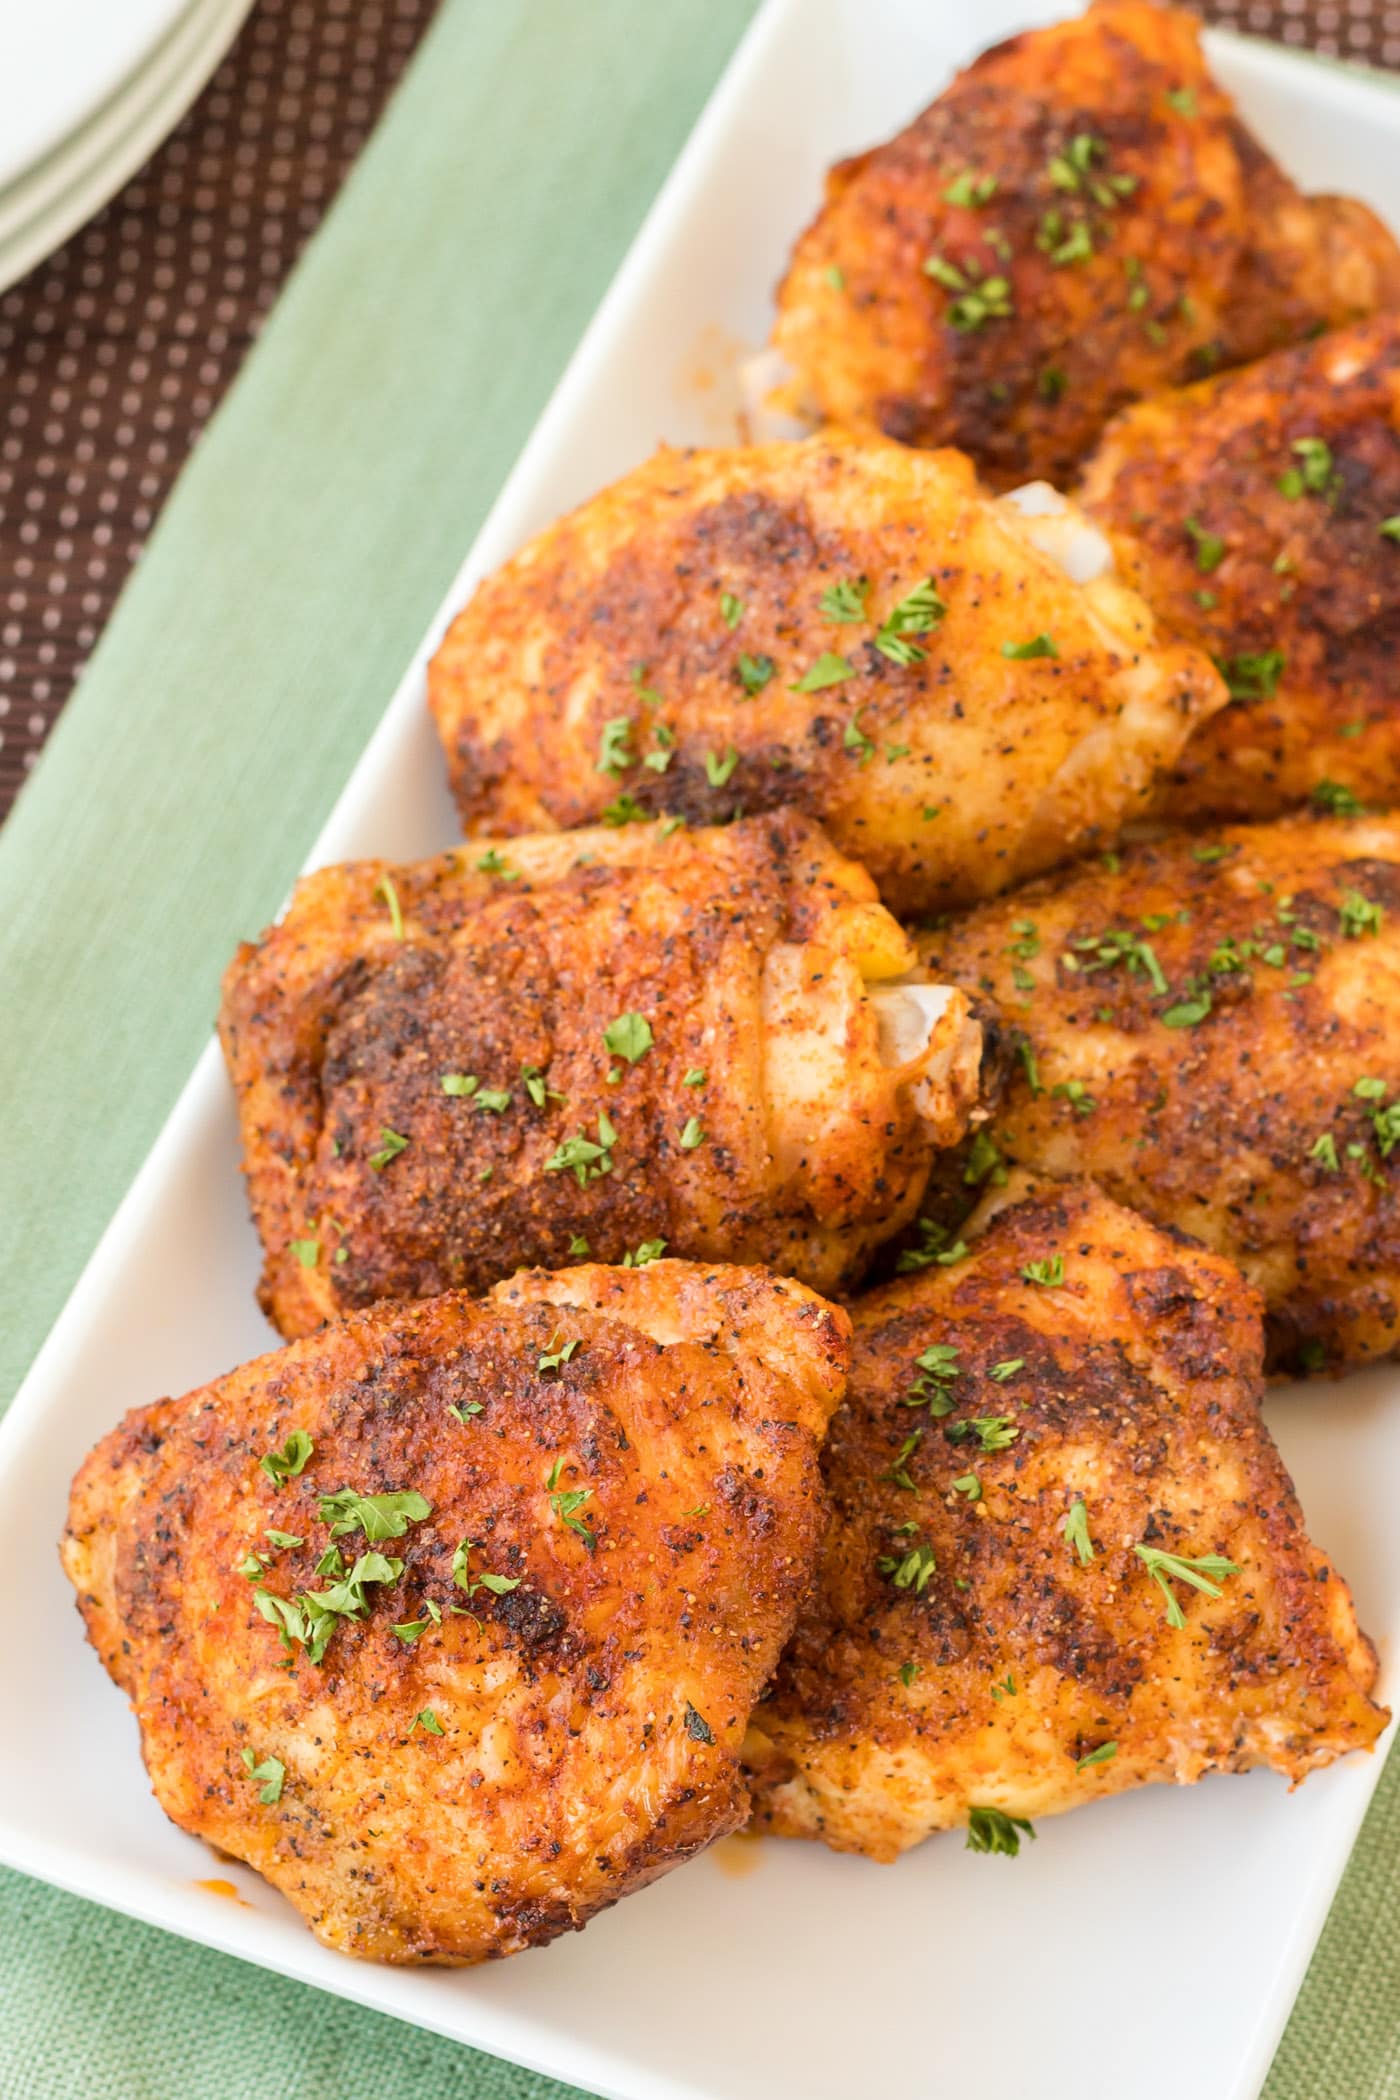 Baked Chicken Thighs - Amanda's Cookin' - Chicken & Poultry